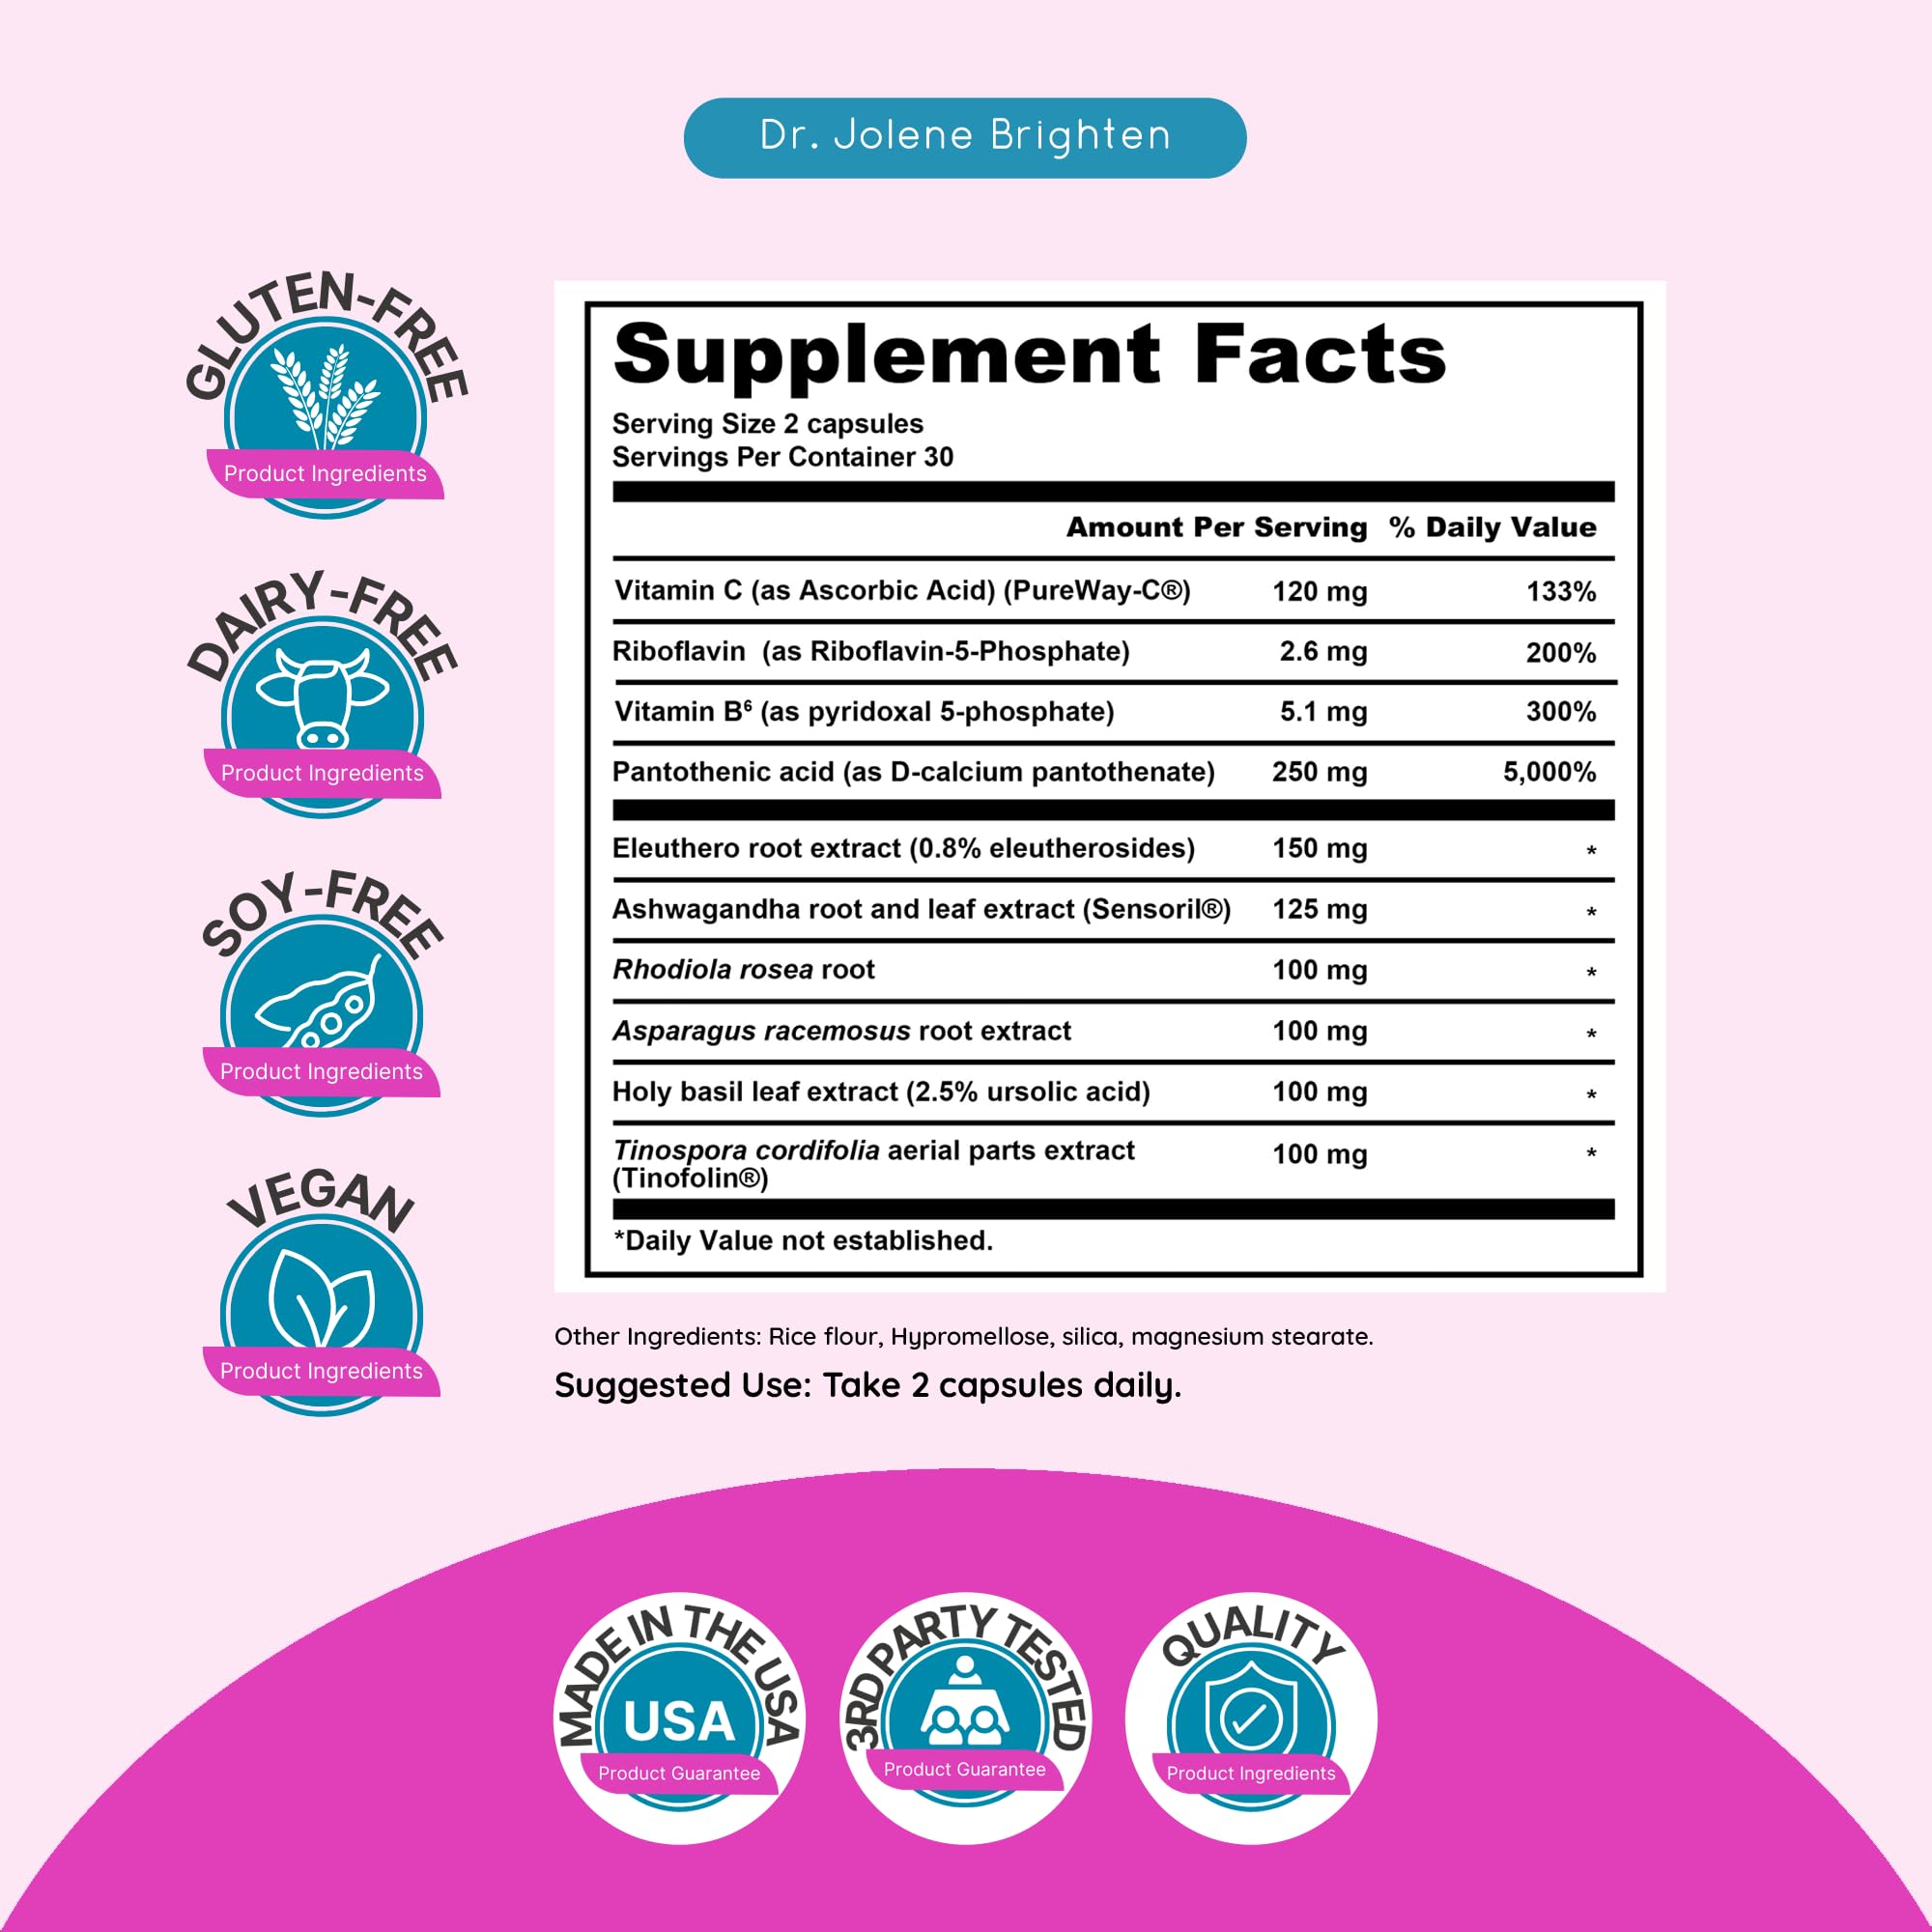 Dr. Brighten PCOS Basic Kit - Balance Women's Hormone Support, Arendal Support, and Saw Palmetto Plus - Vegan, Non-GMO Supplements for Women